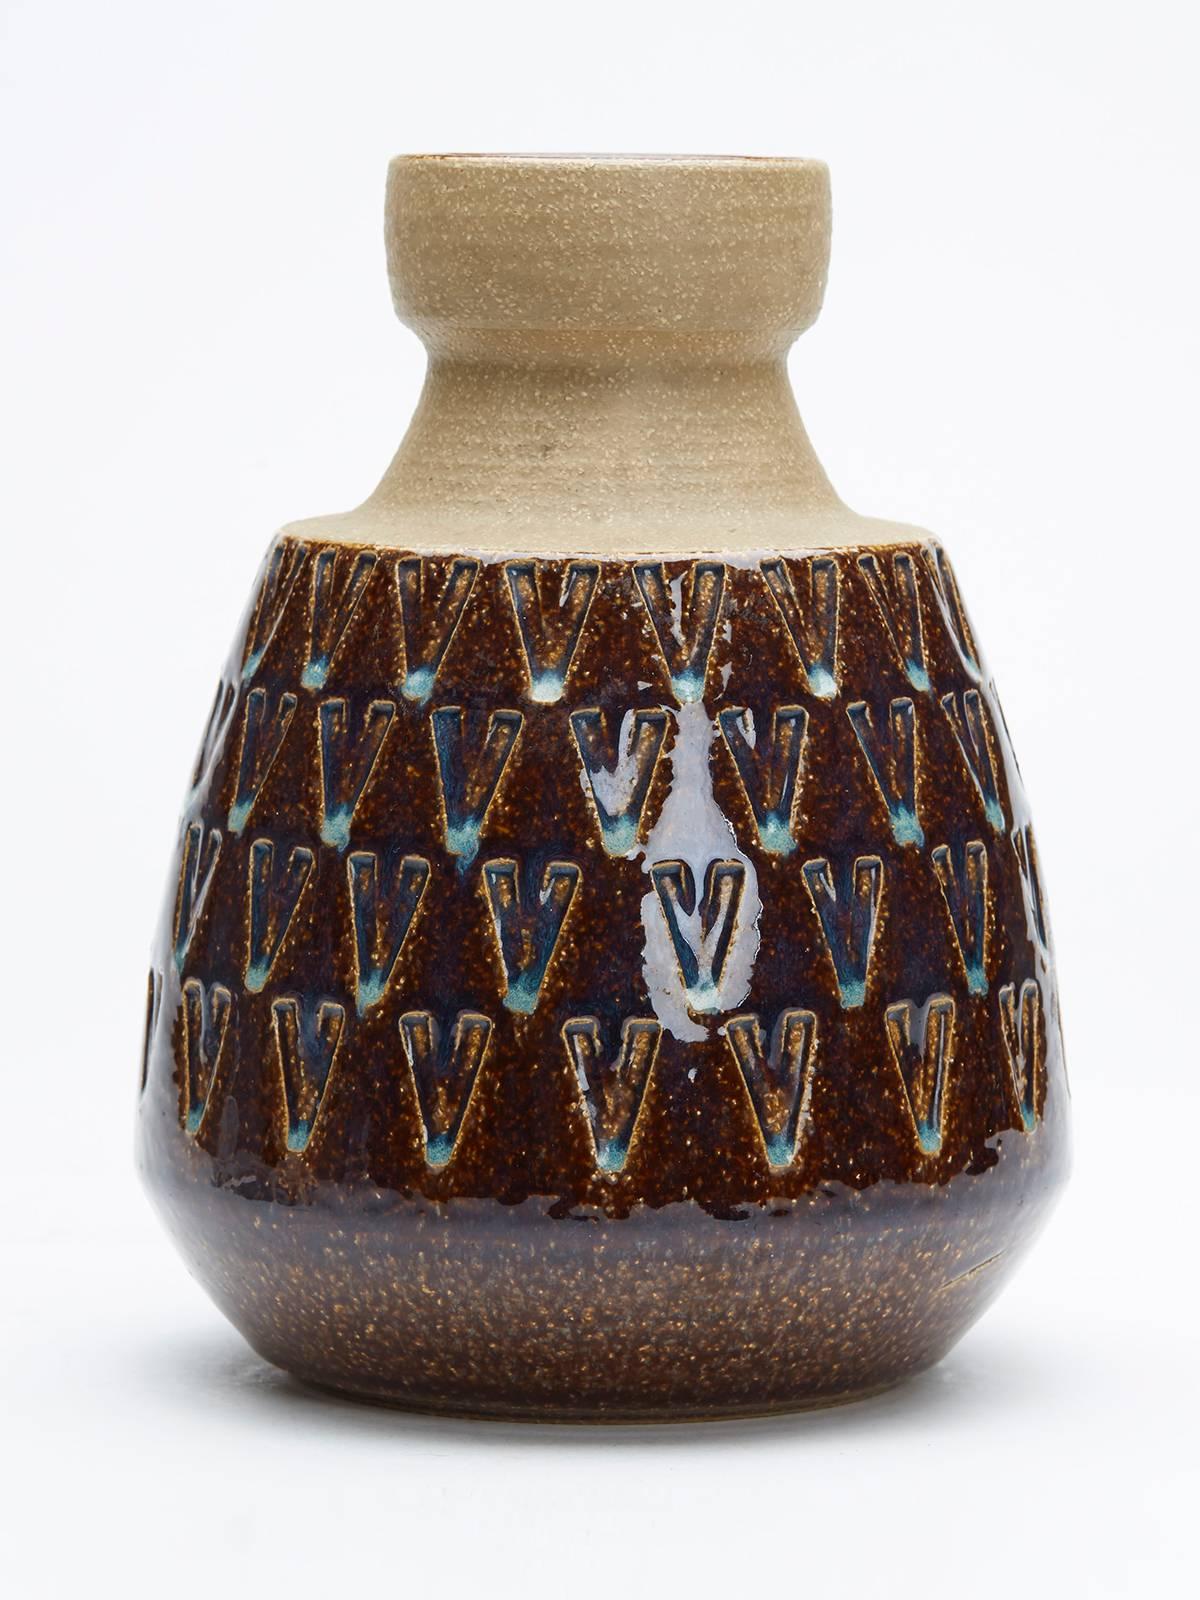 A stylish vintage Danish art pottery vase with an incised V-pattern design glazed in mottled brown and blue with the foot and should left unglazed. The vase is designed by Einar Johansen for Soholm Bornholm and is numbered 3190.